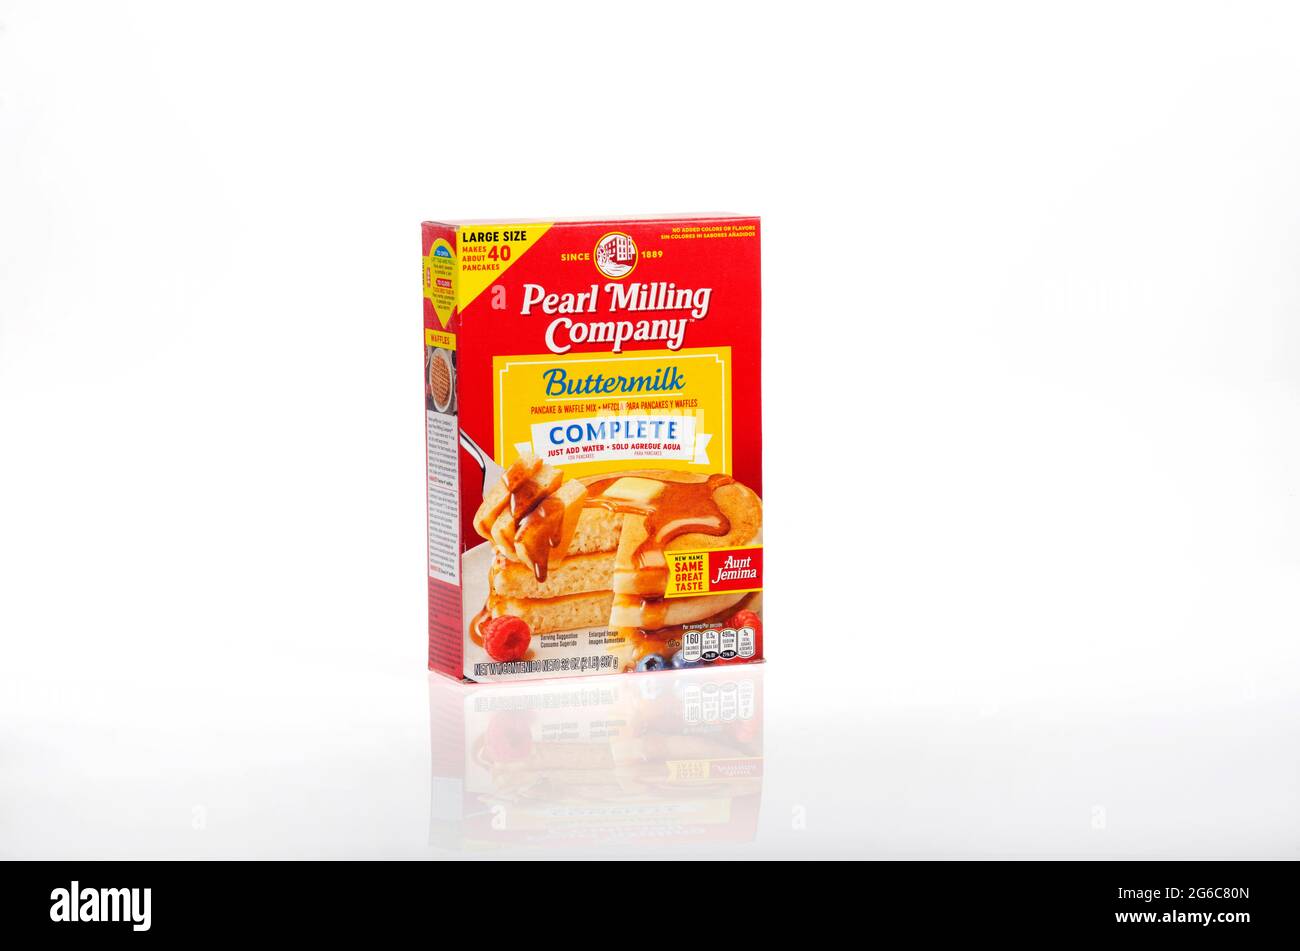 Pearl Milling, new identity for Aunt Jemima,  Buttermilk Complete Pancake Mix Box Stock Photo